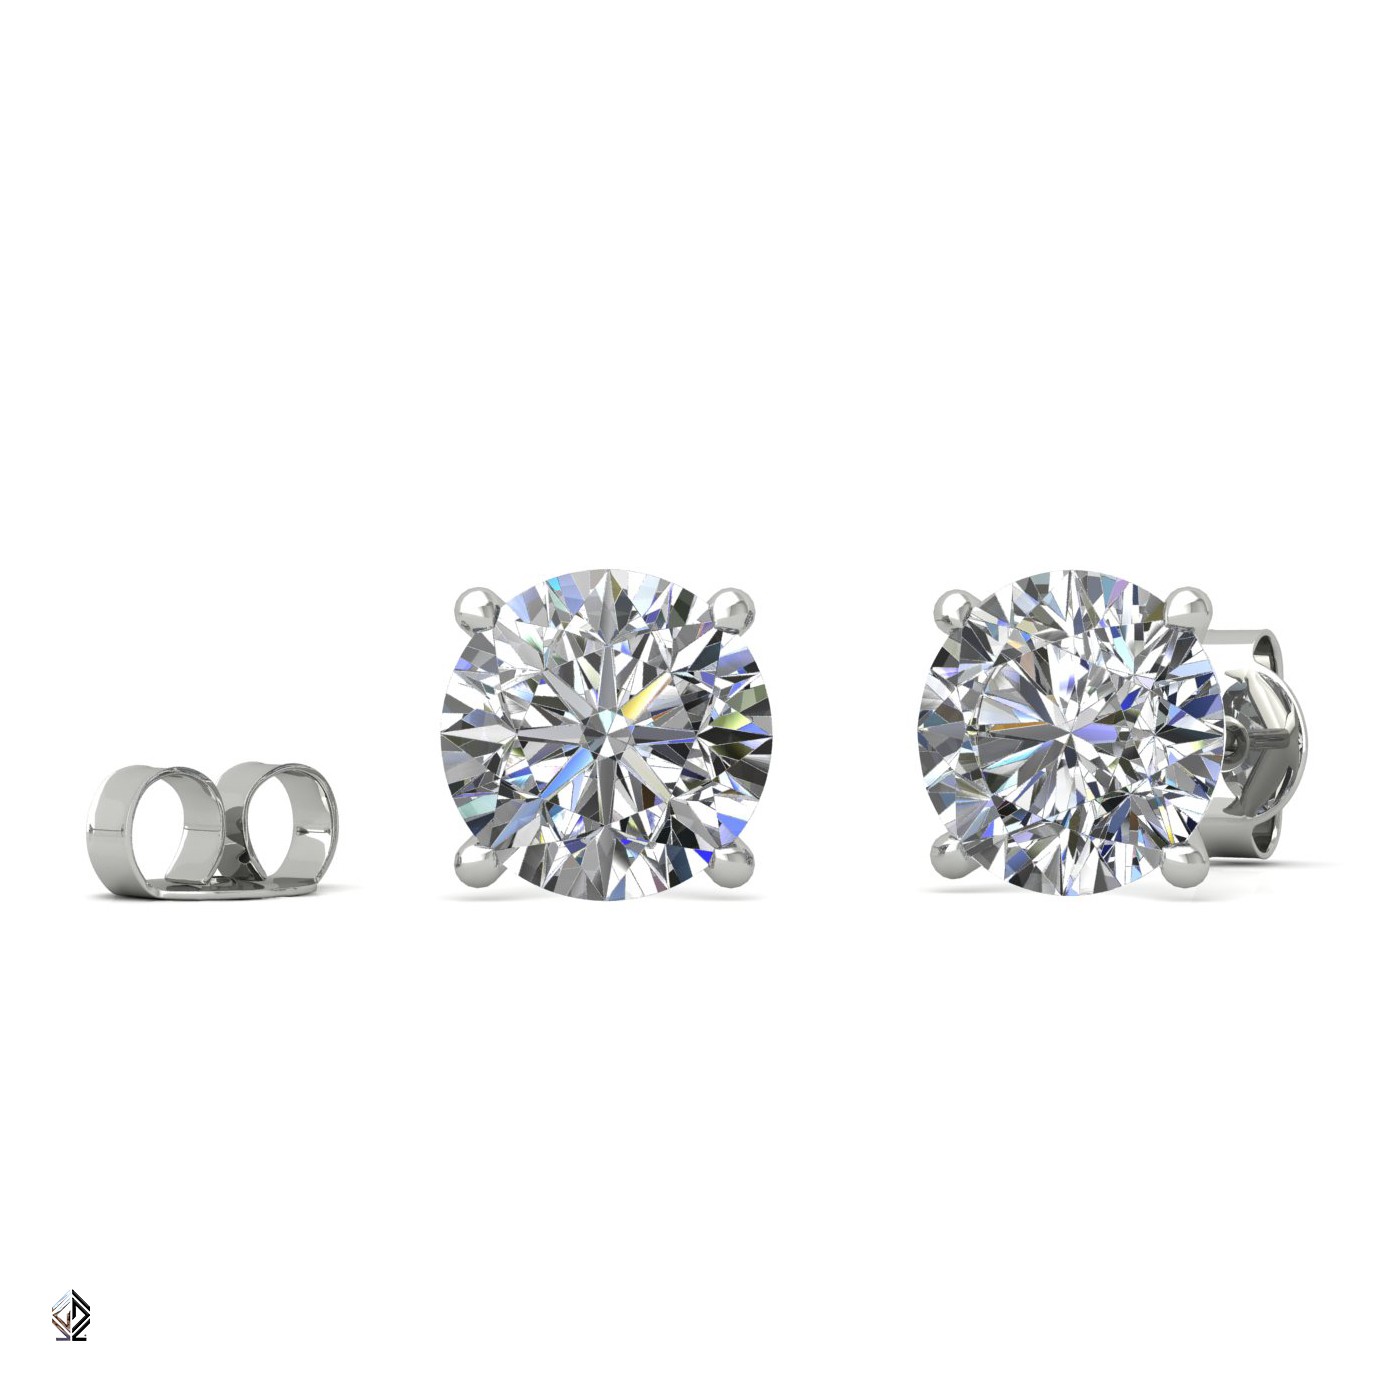 18k white gold 0,3 ct each (0,6 tcw) 4 prongs round cut classic diamond earring studs Photos & images